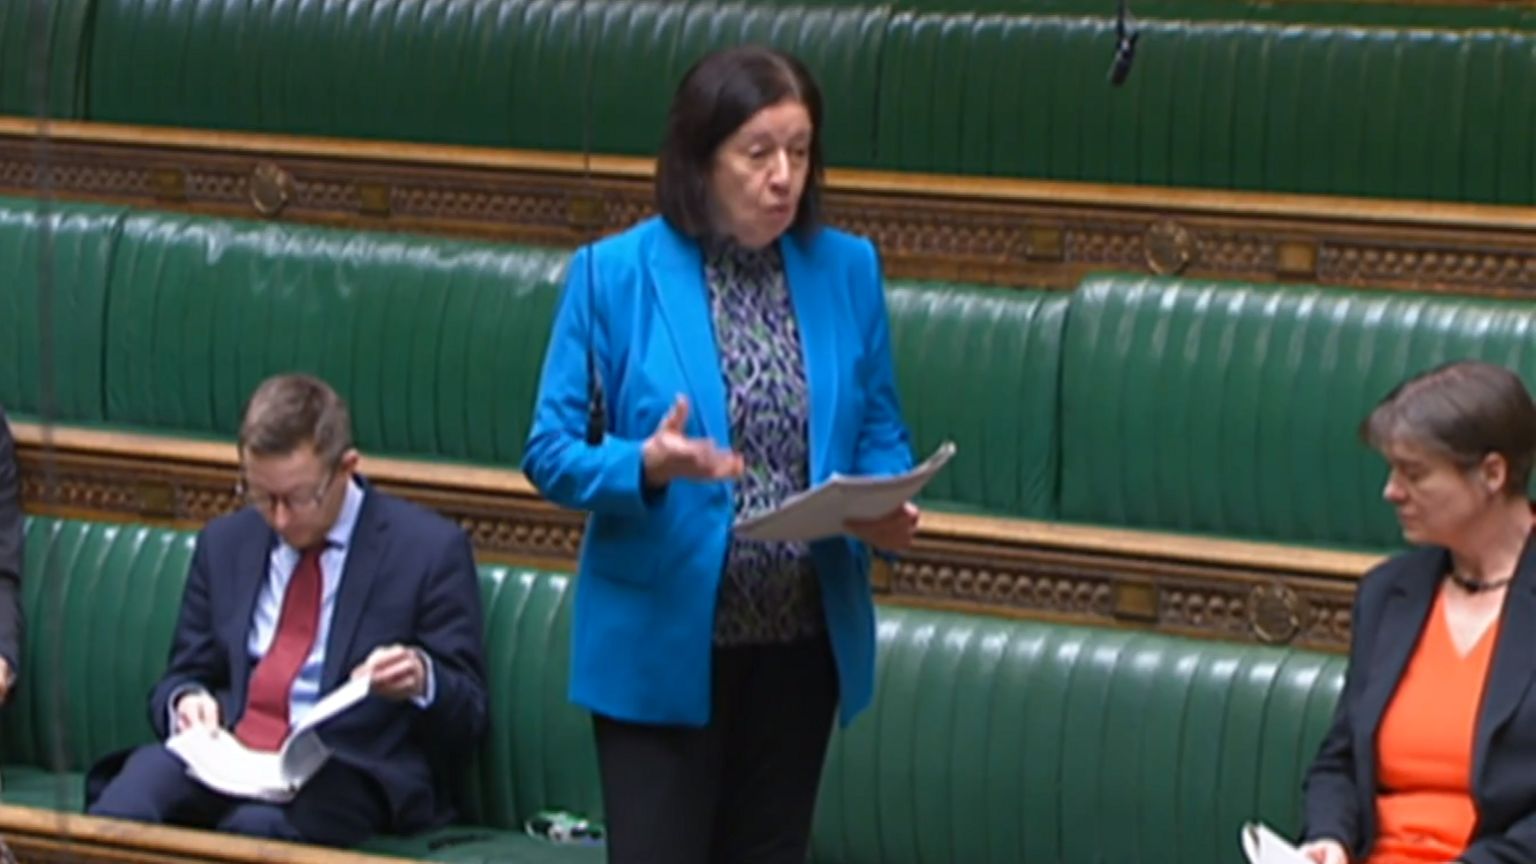 Jo Gideon MP in the House of Commons